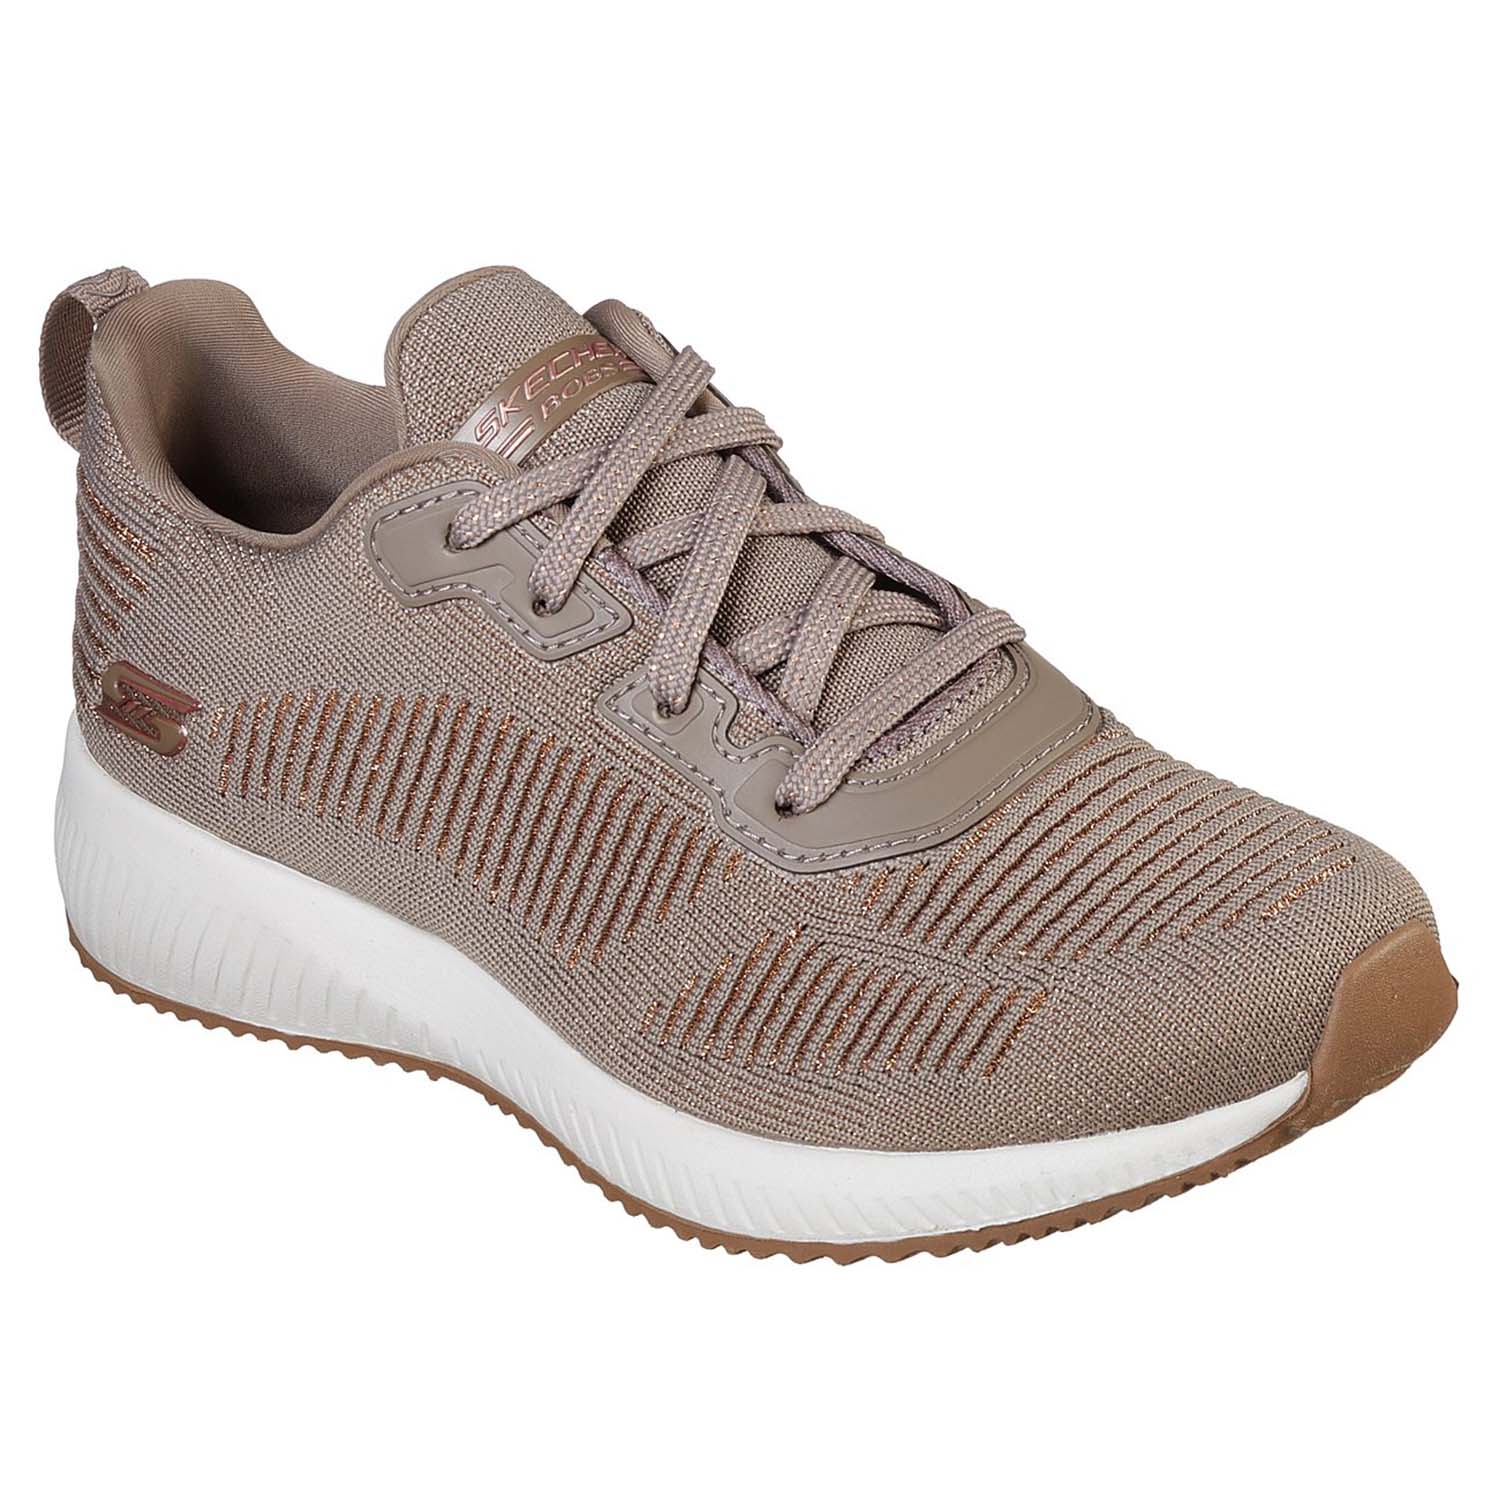 Skechers BOBs Sport BOBS SQUAD GLAM LEAGUE Sneakers Damen Schuhe taupe